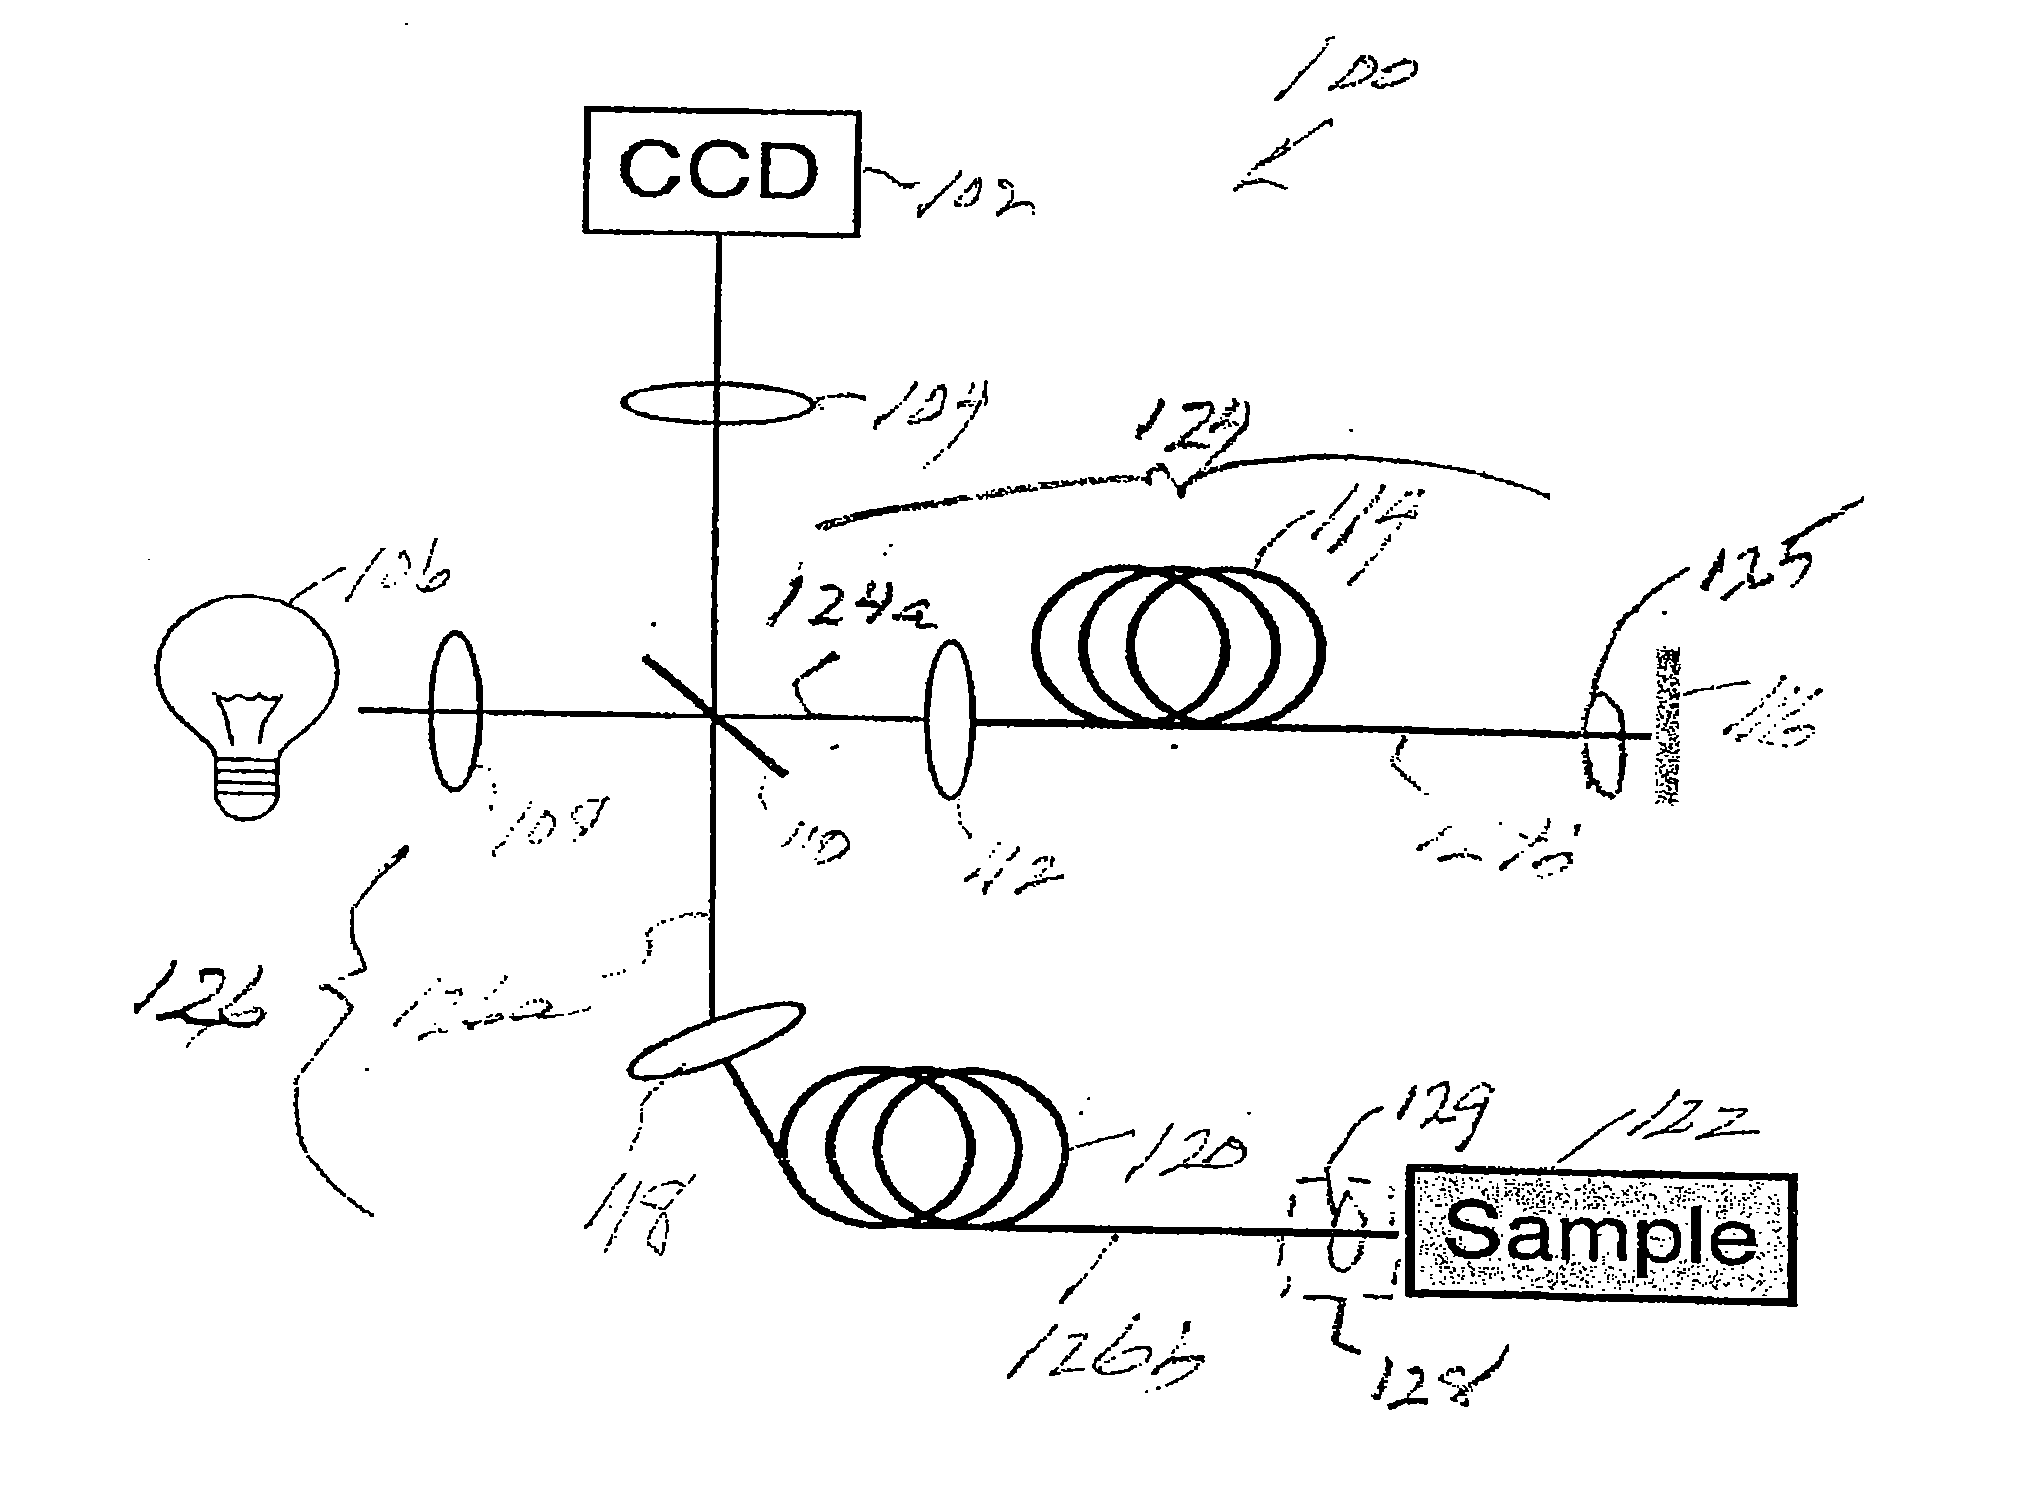 Systems and methods for generating data using one or more endoscopic microscopy techniques